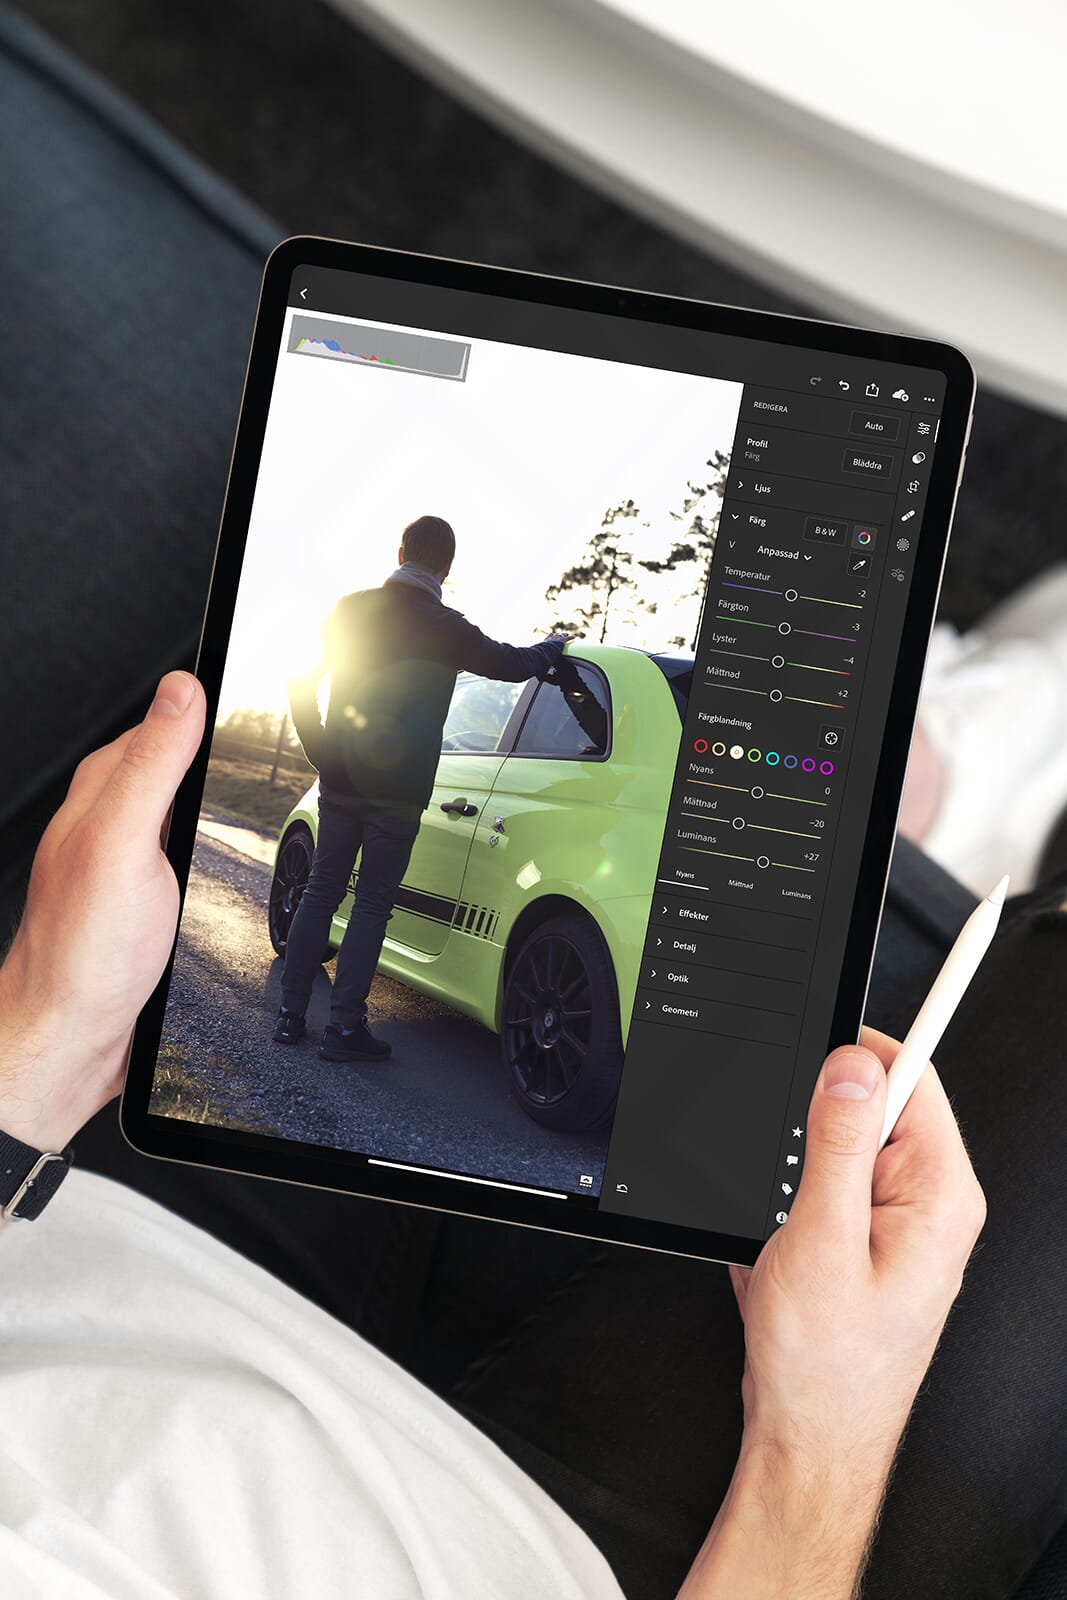 Tablet with photo editing software open featuring a photo of a man standing next to a green sports car at sunset.